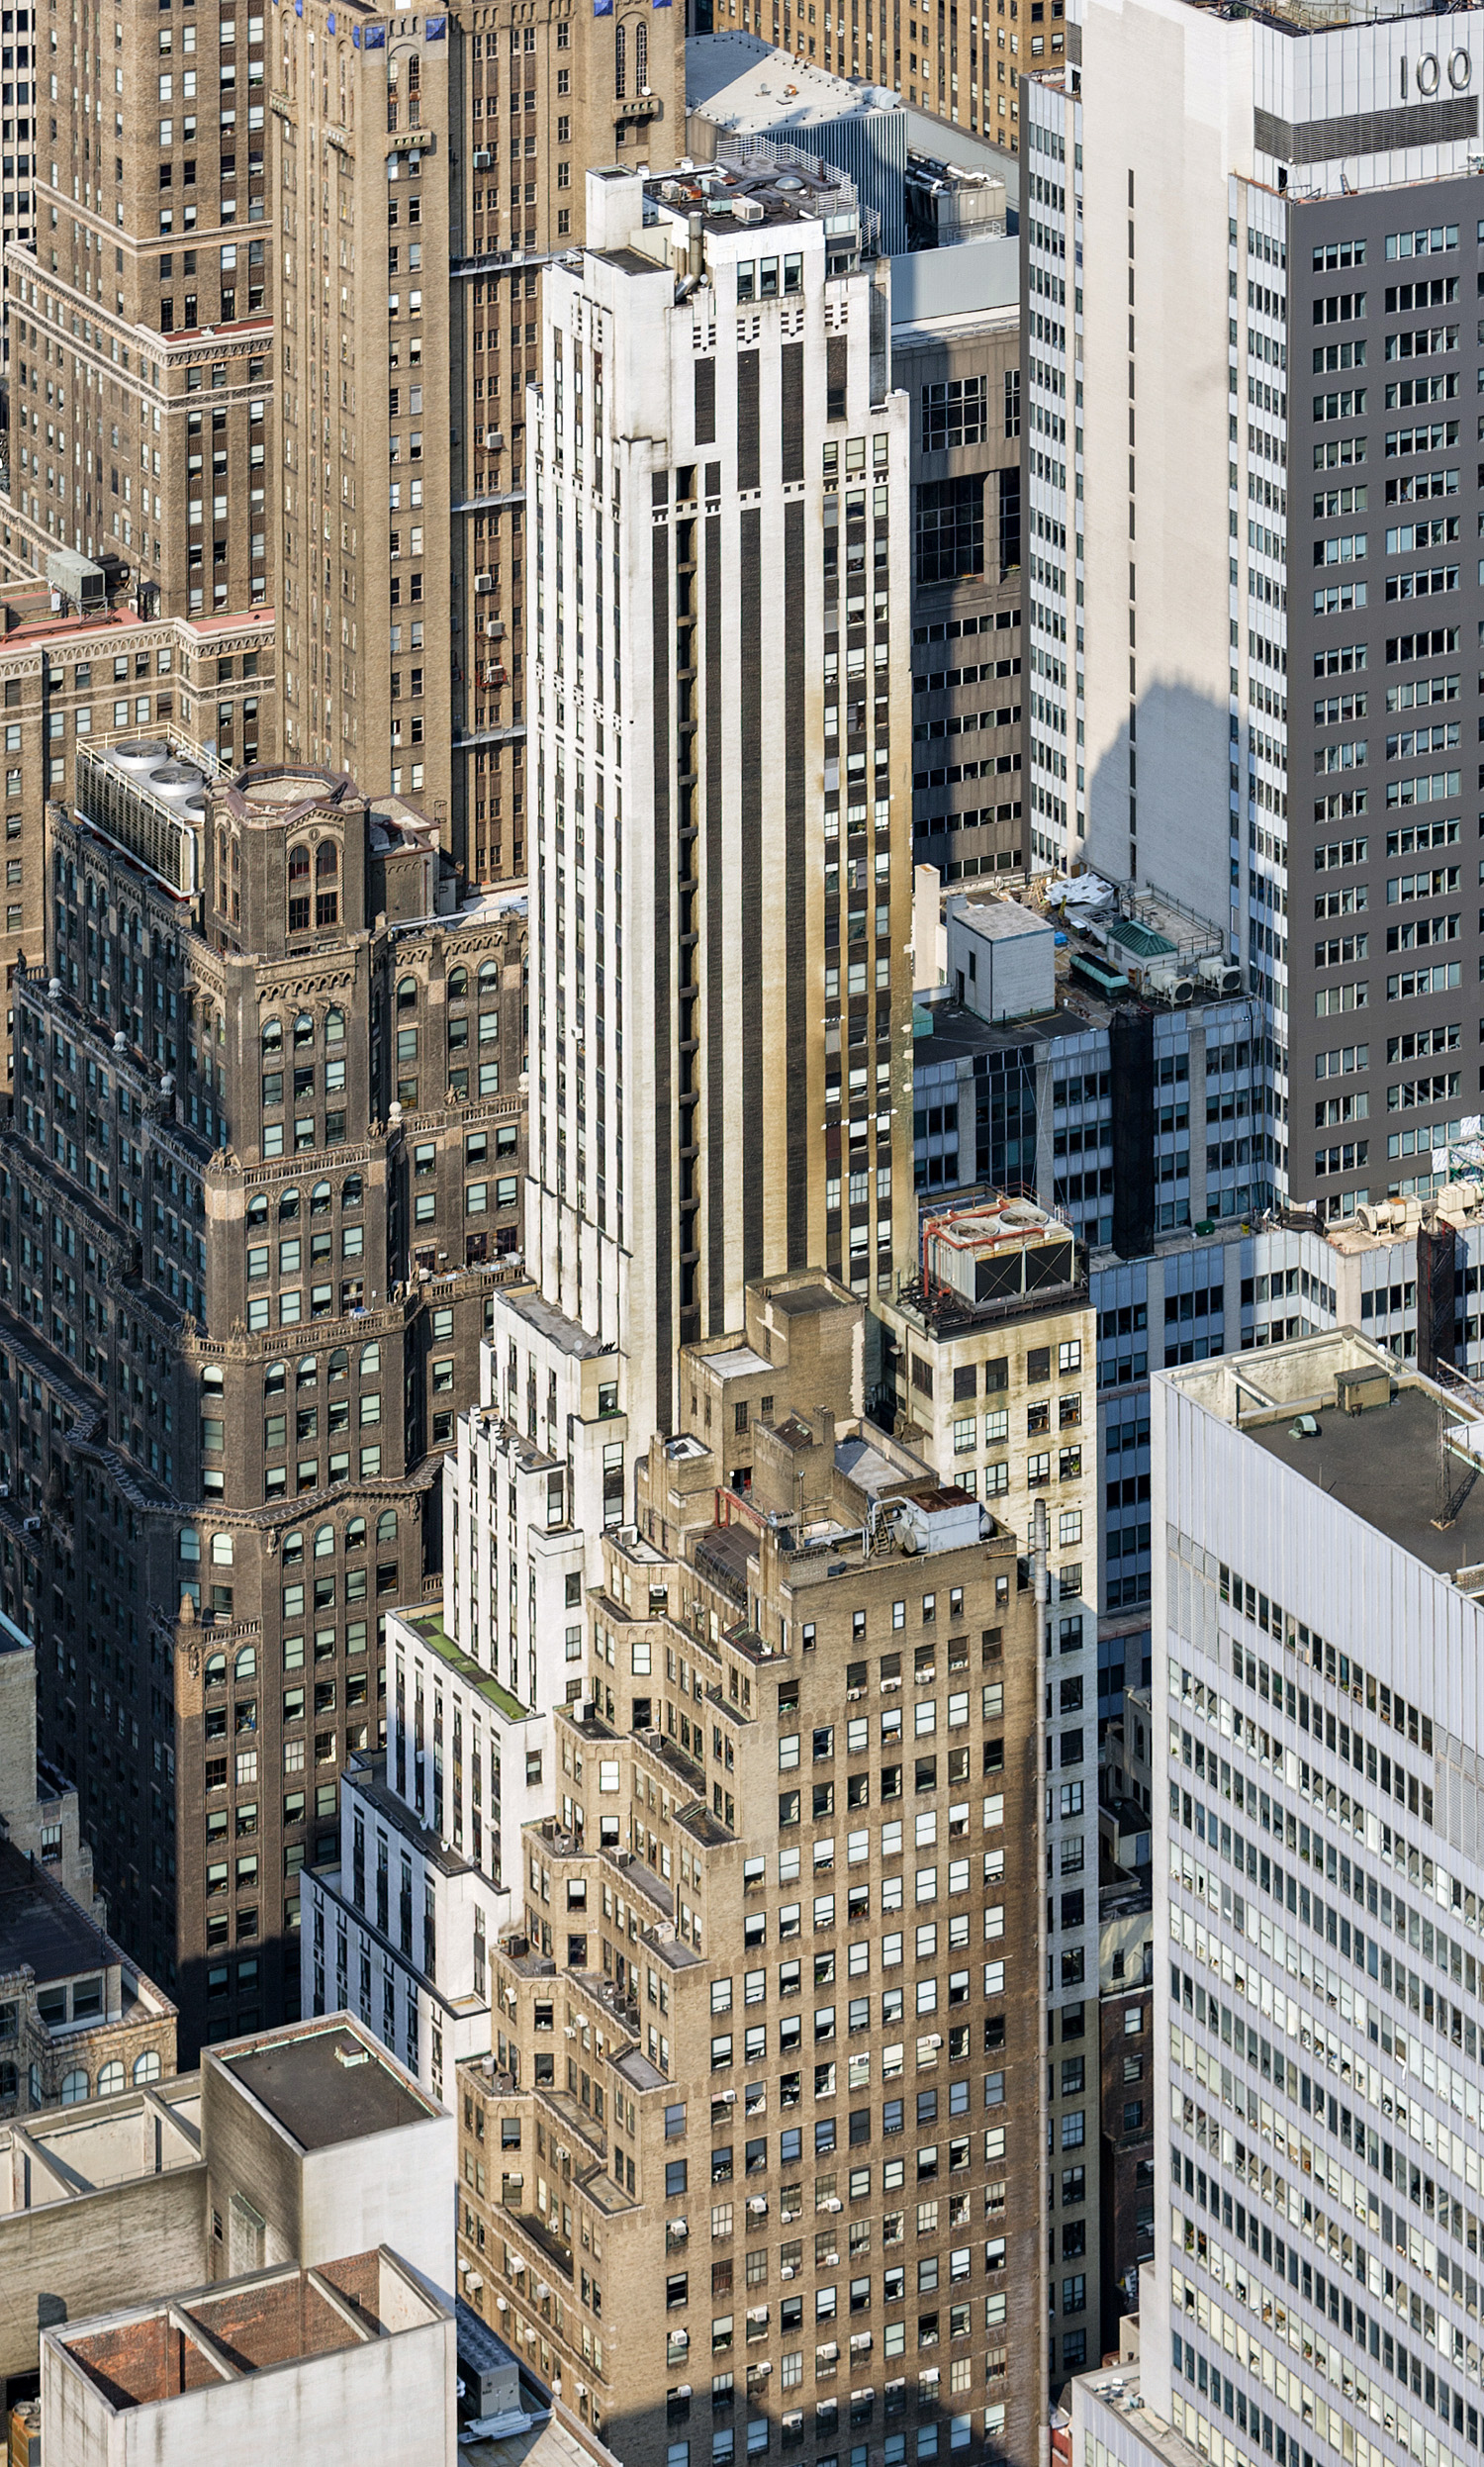 Johns-Manville Building, New York City - View from Empire State Building. © Mathias Beinling